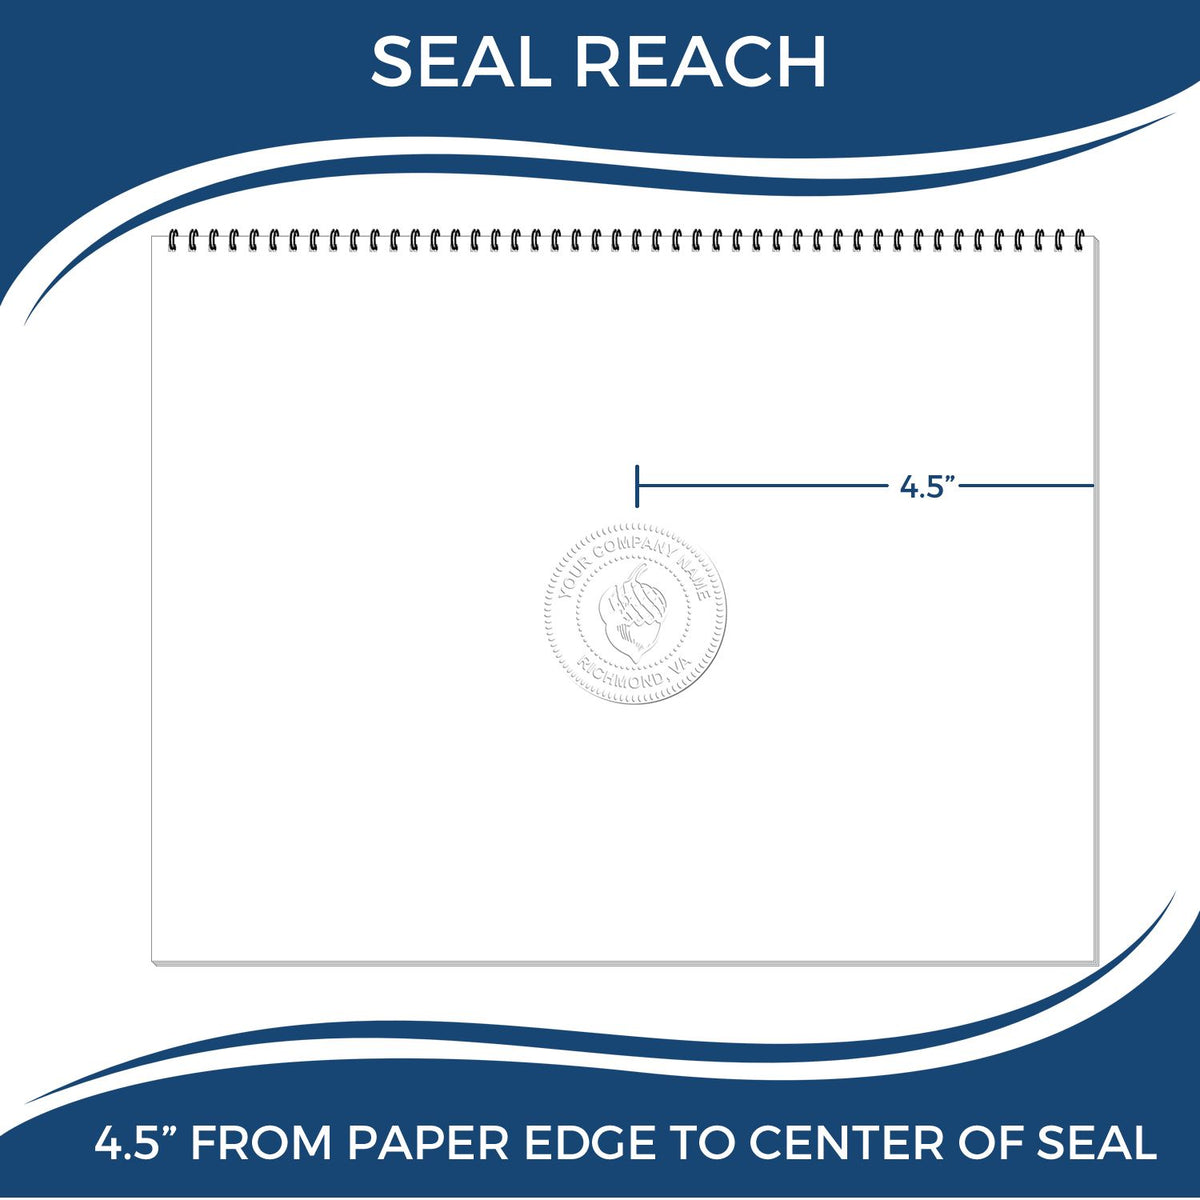 An infographic showing the seal reach which is represented by a ruler and a miniature seal image of the Extended Long Reach Nebraska Surveyor Embosser